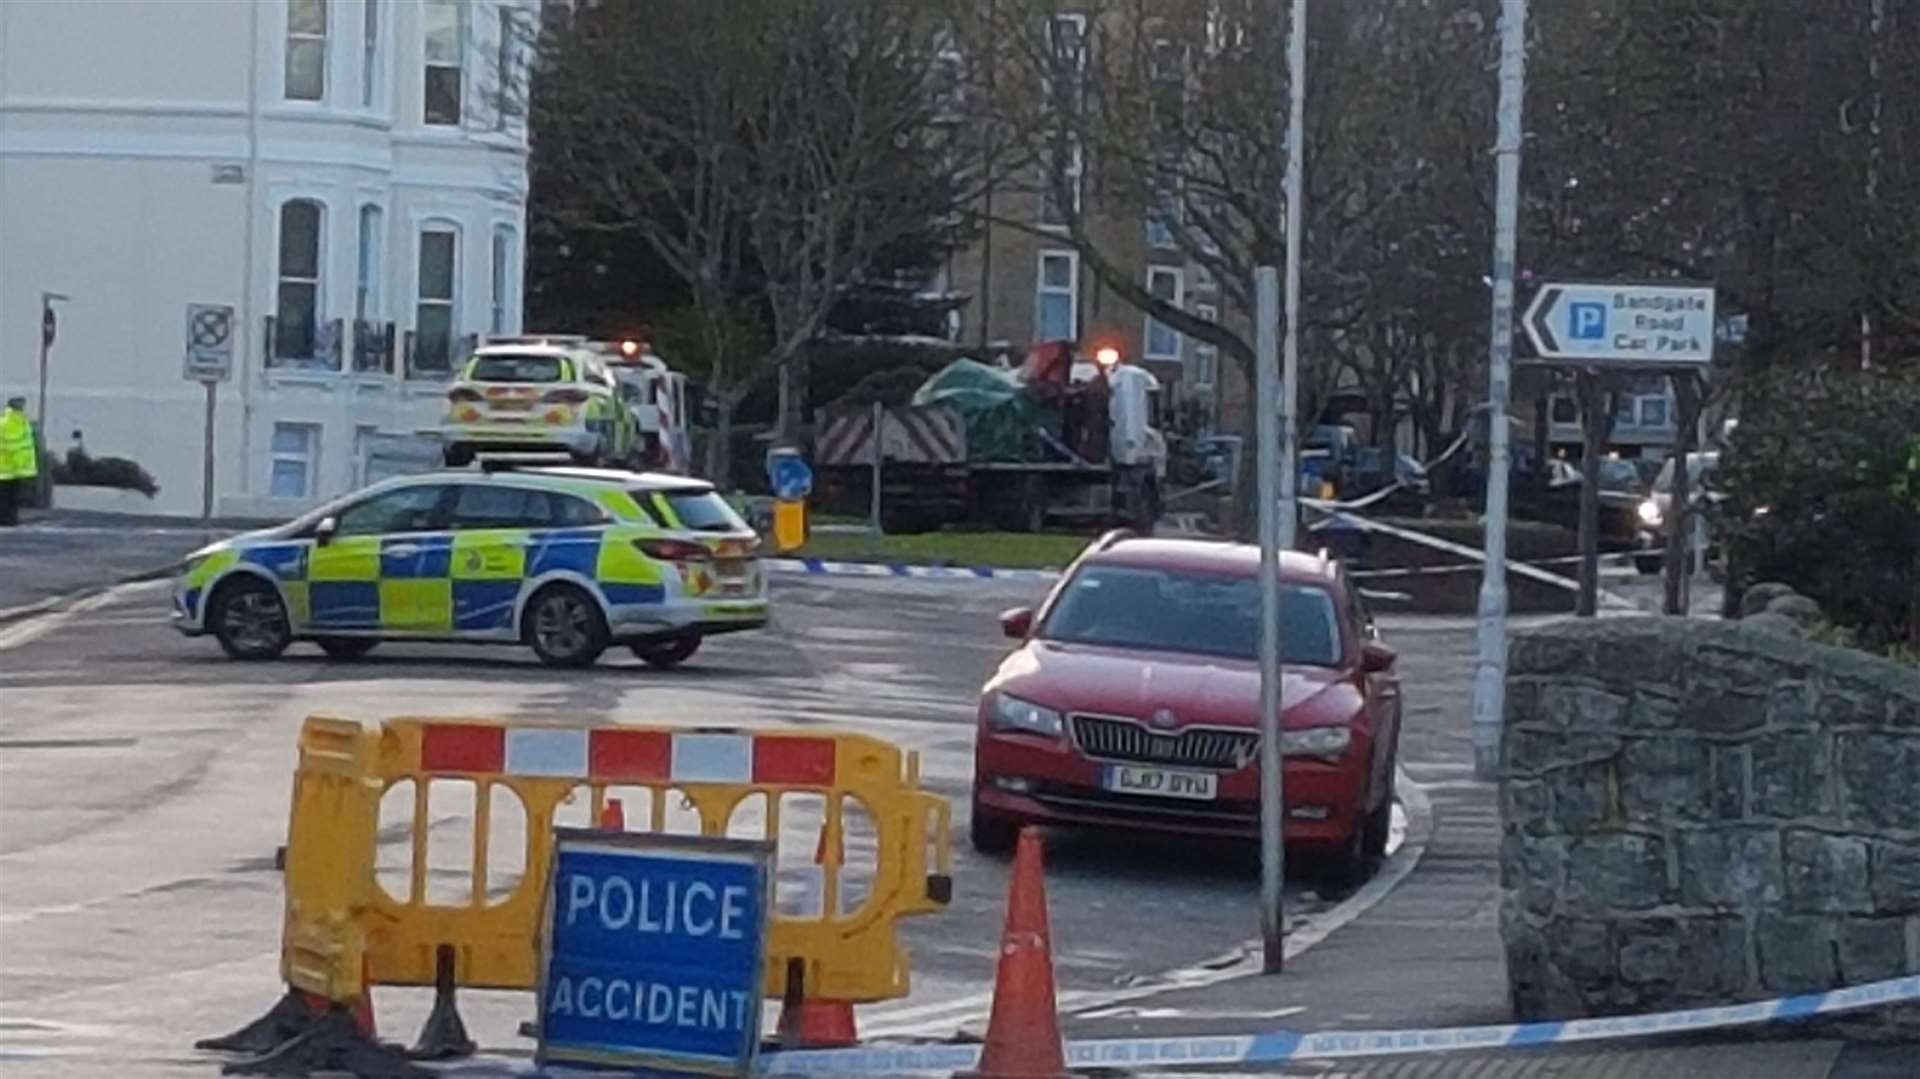 The scene of the crash in 2018. Picture: Chris Rolfe